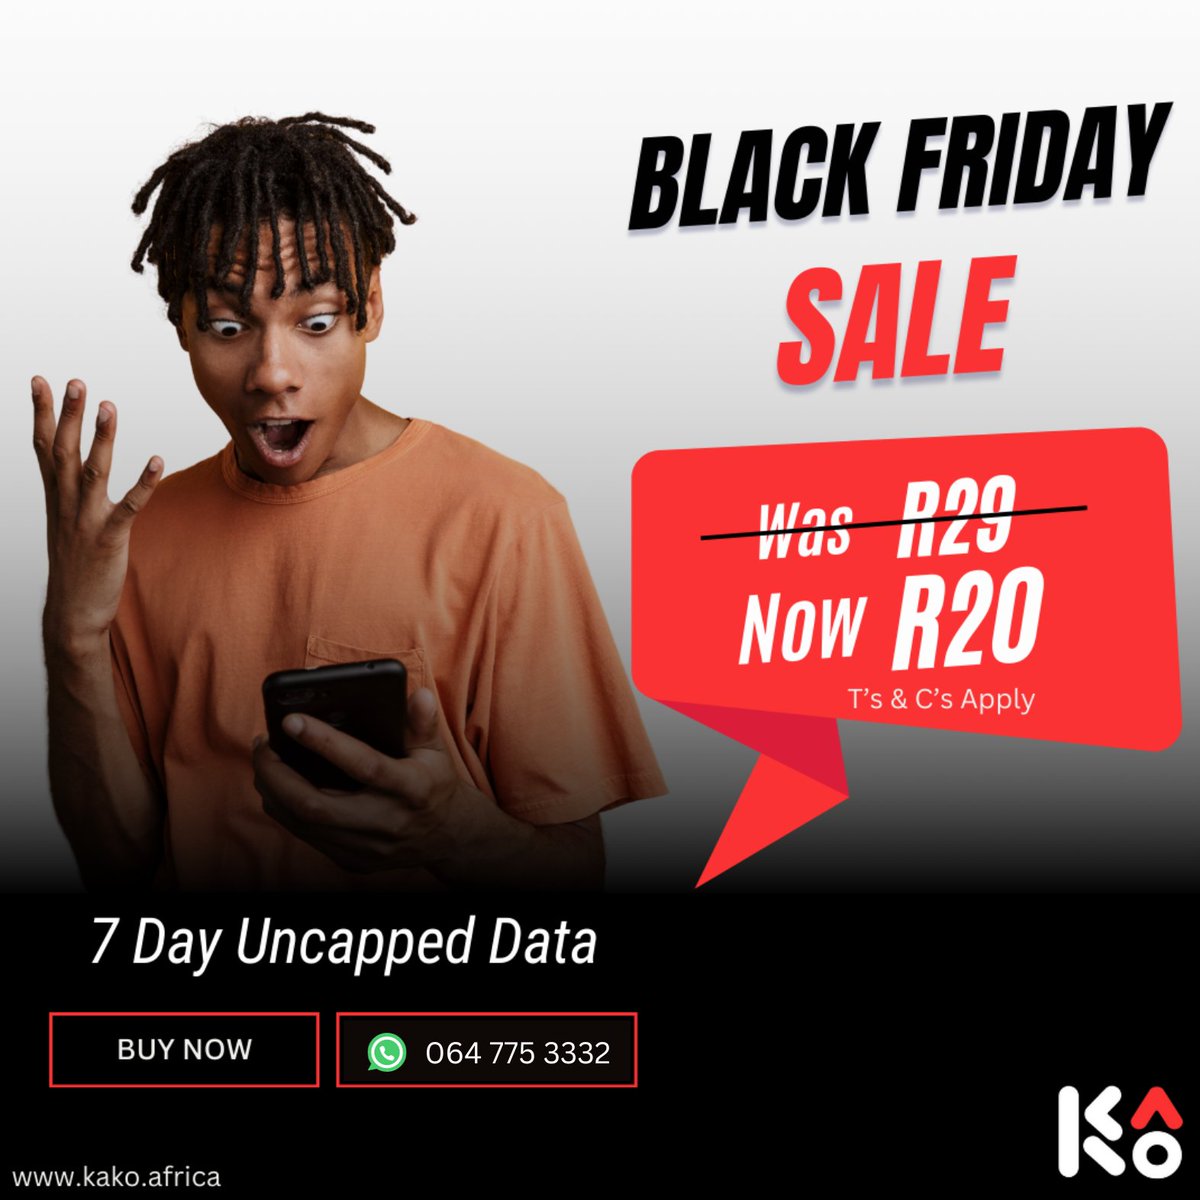 Black Friday is here, and so are amazing deals from KaKo! 🌟 Get 7 day unlimited data @R20 and 30 day unlimited data @R79. Reach us on WhatsApp at 064 775 3332 to claim yours. Offer valid until Nov 30. #BlackFridayDeals #MoreValue #DataSpecials #CosmoCity #KaKo @cosmocityzen